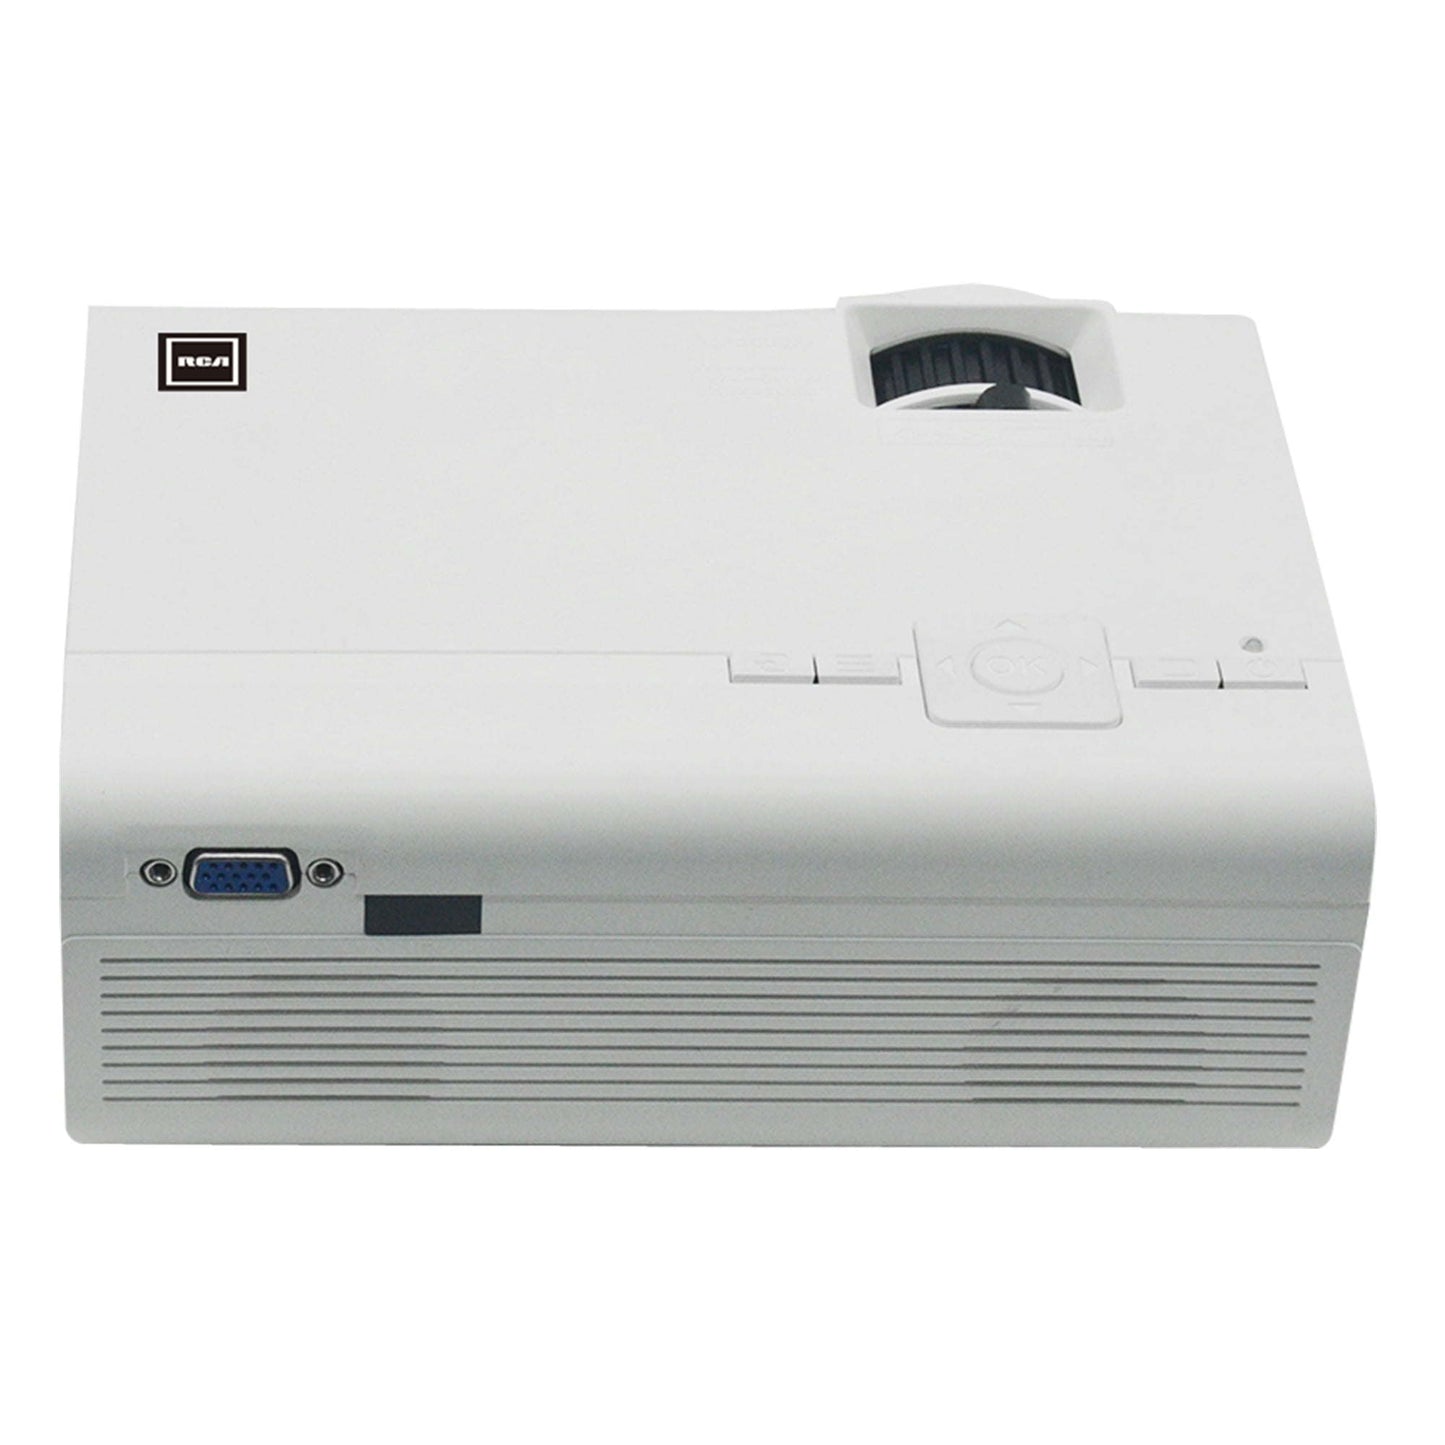 480P LCD Home Theater Projector - Up To 130" RPJ136, White